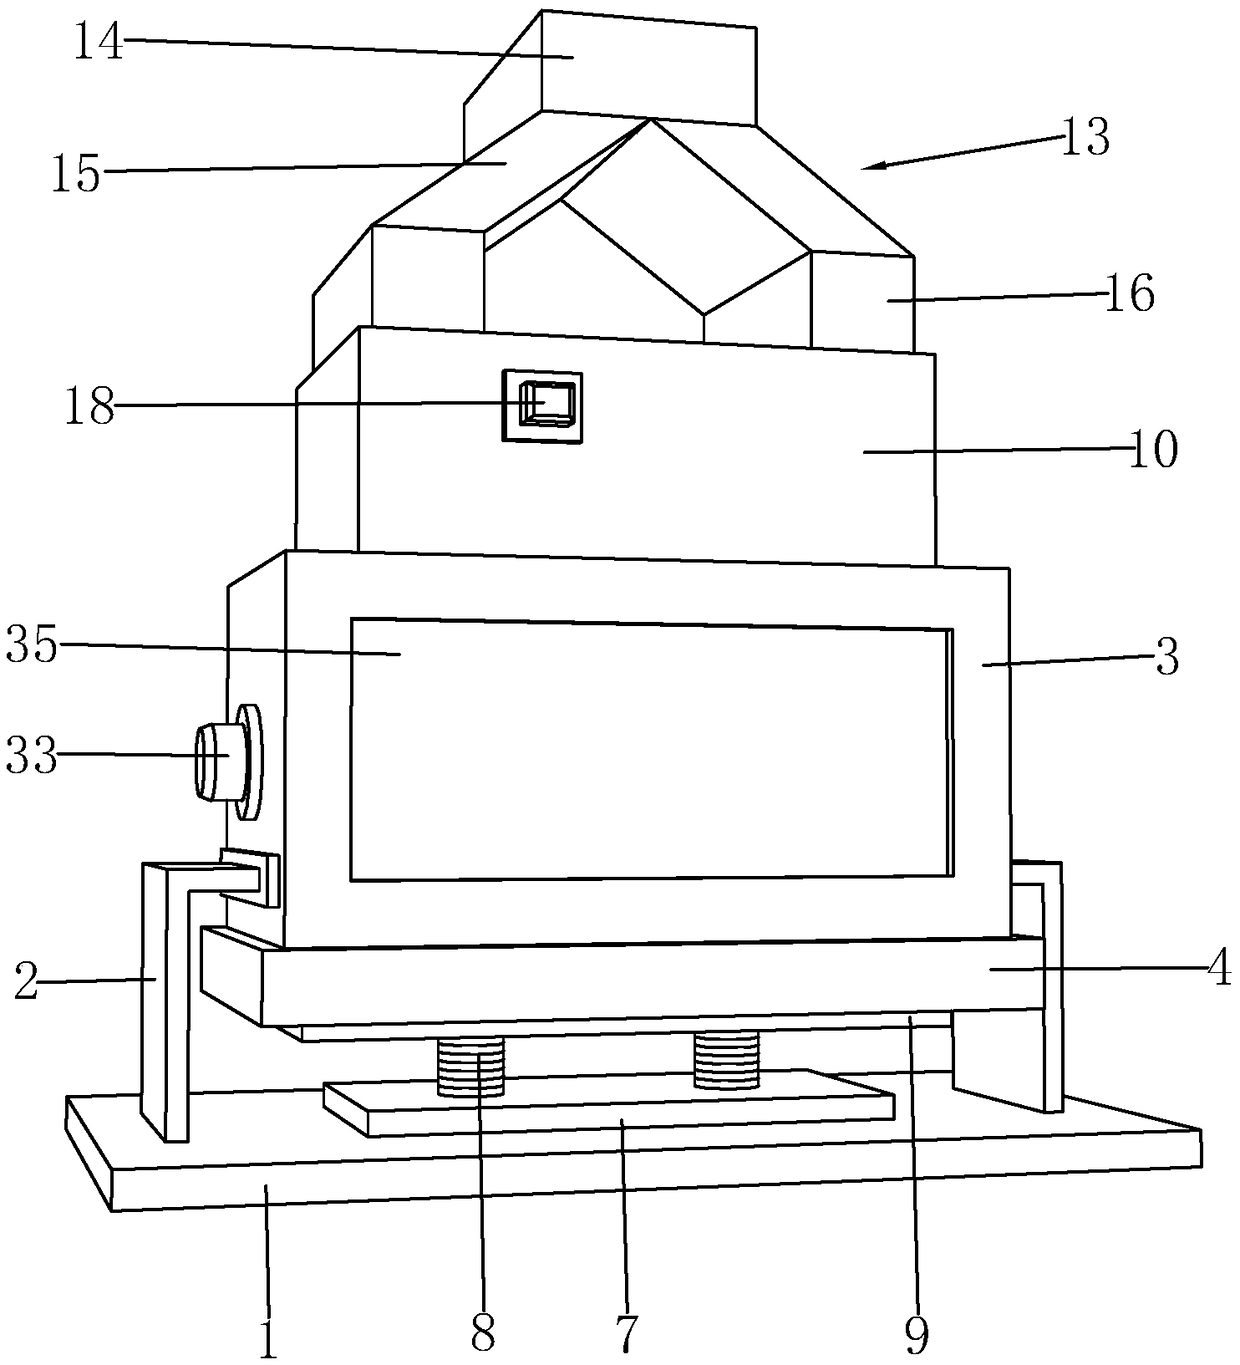 Device for recovering discarded packaging paperboard